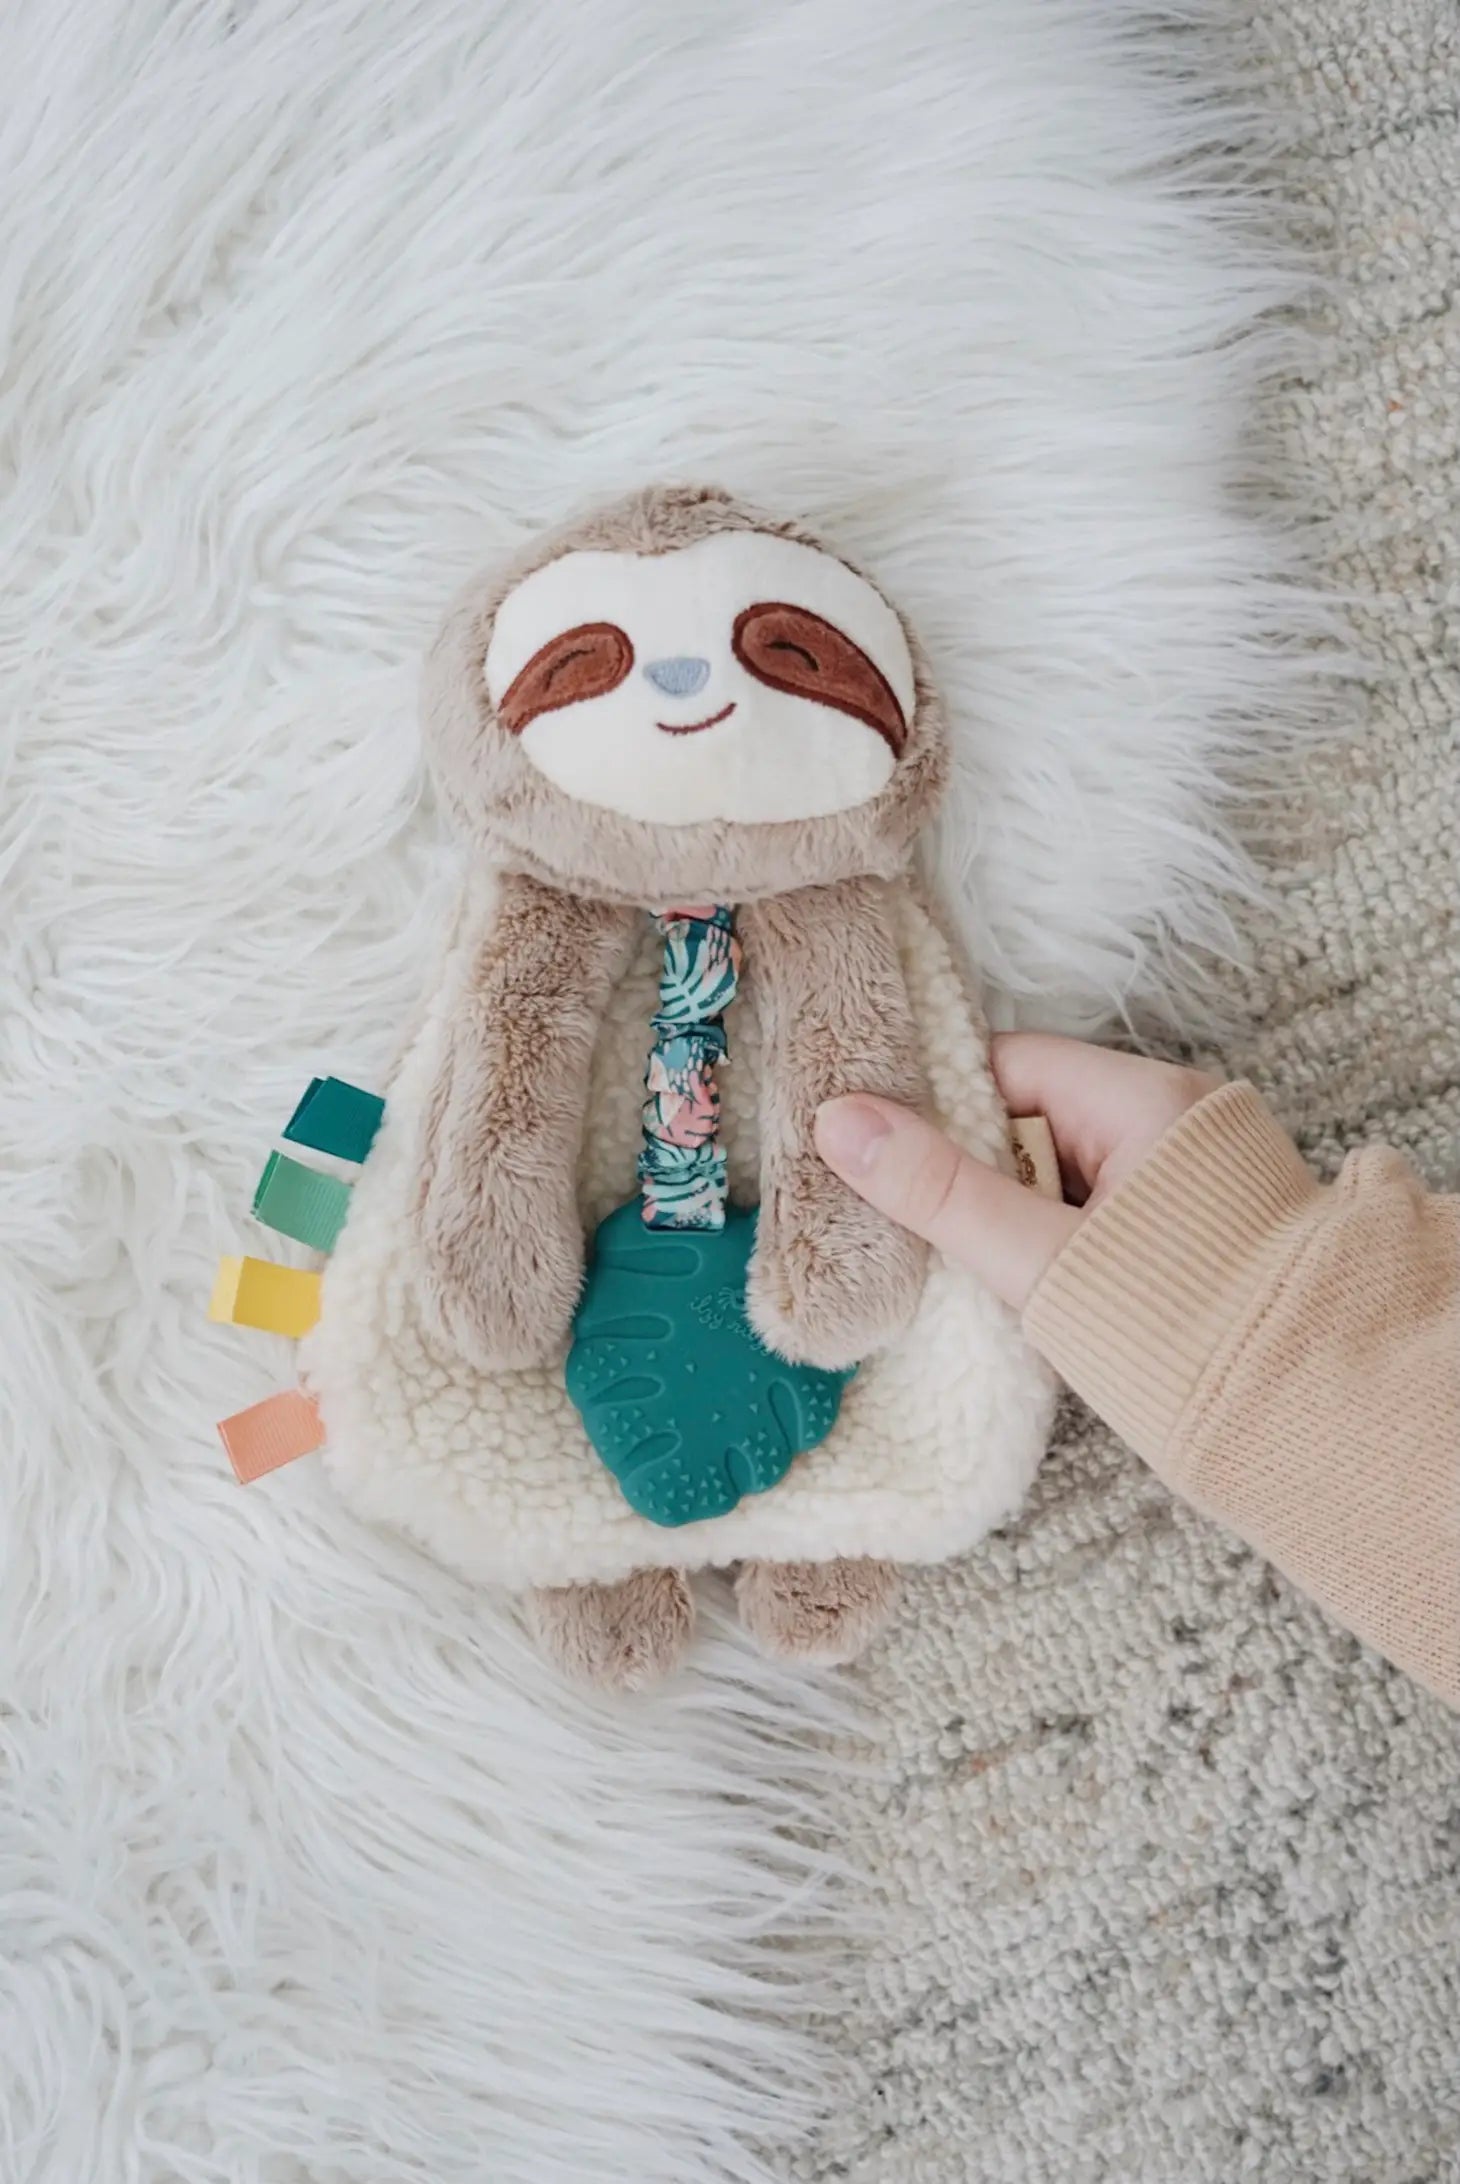 Sloth Itzy Friends Itzy Lovey Plush with Silicone Teether Toy